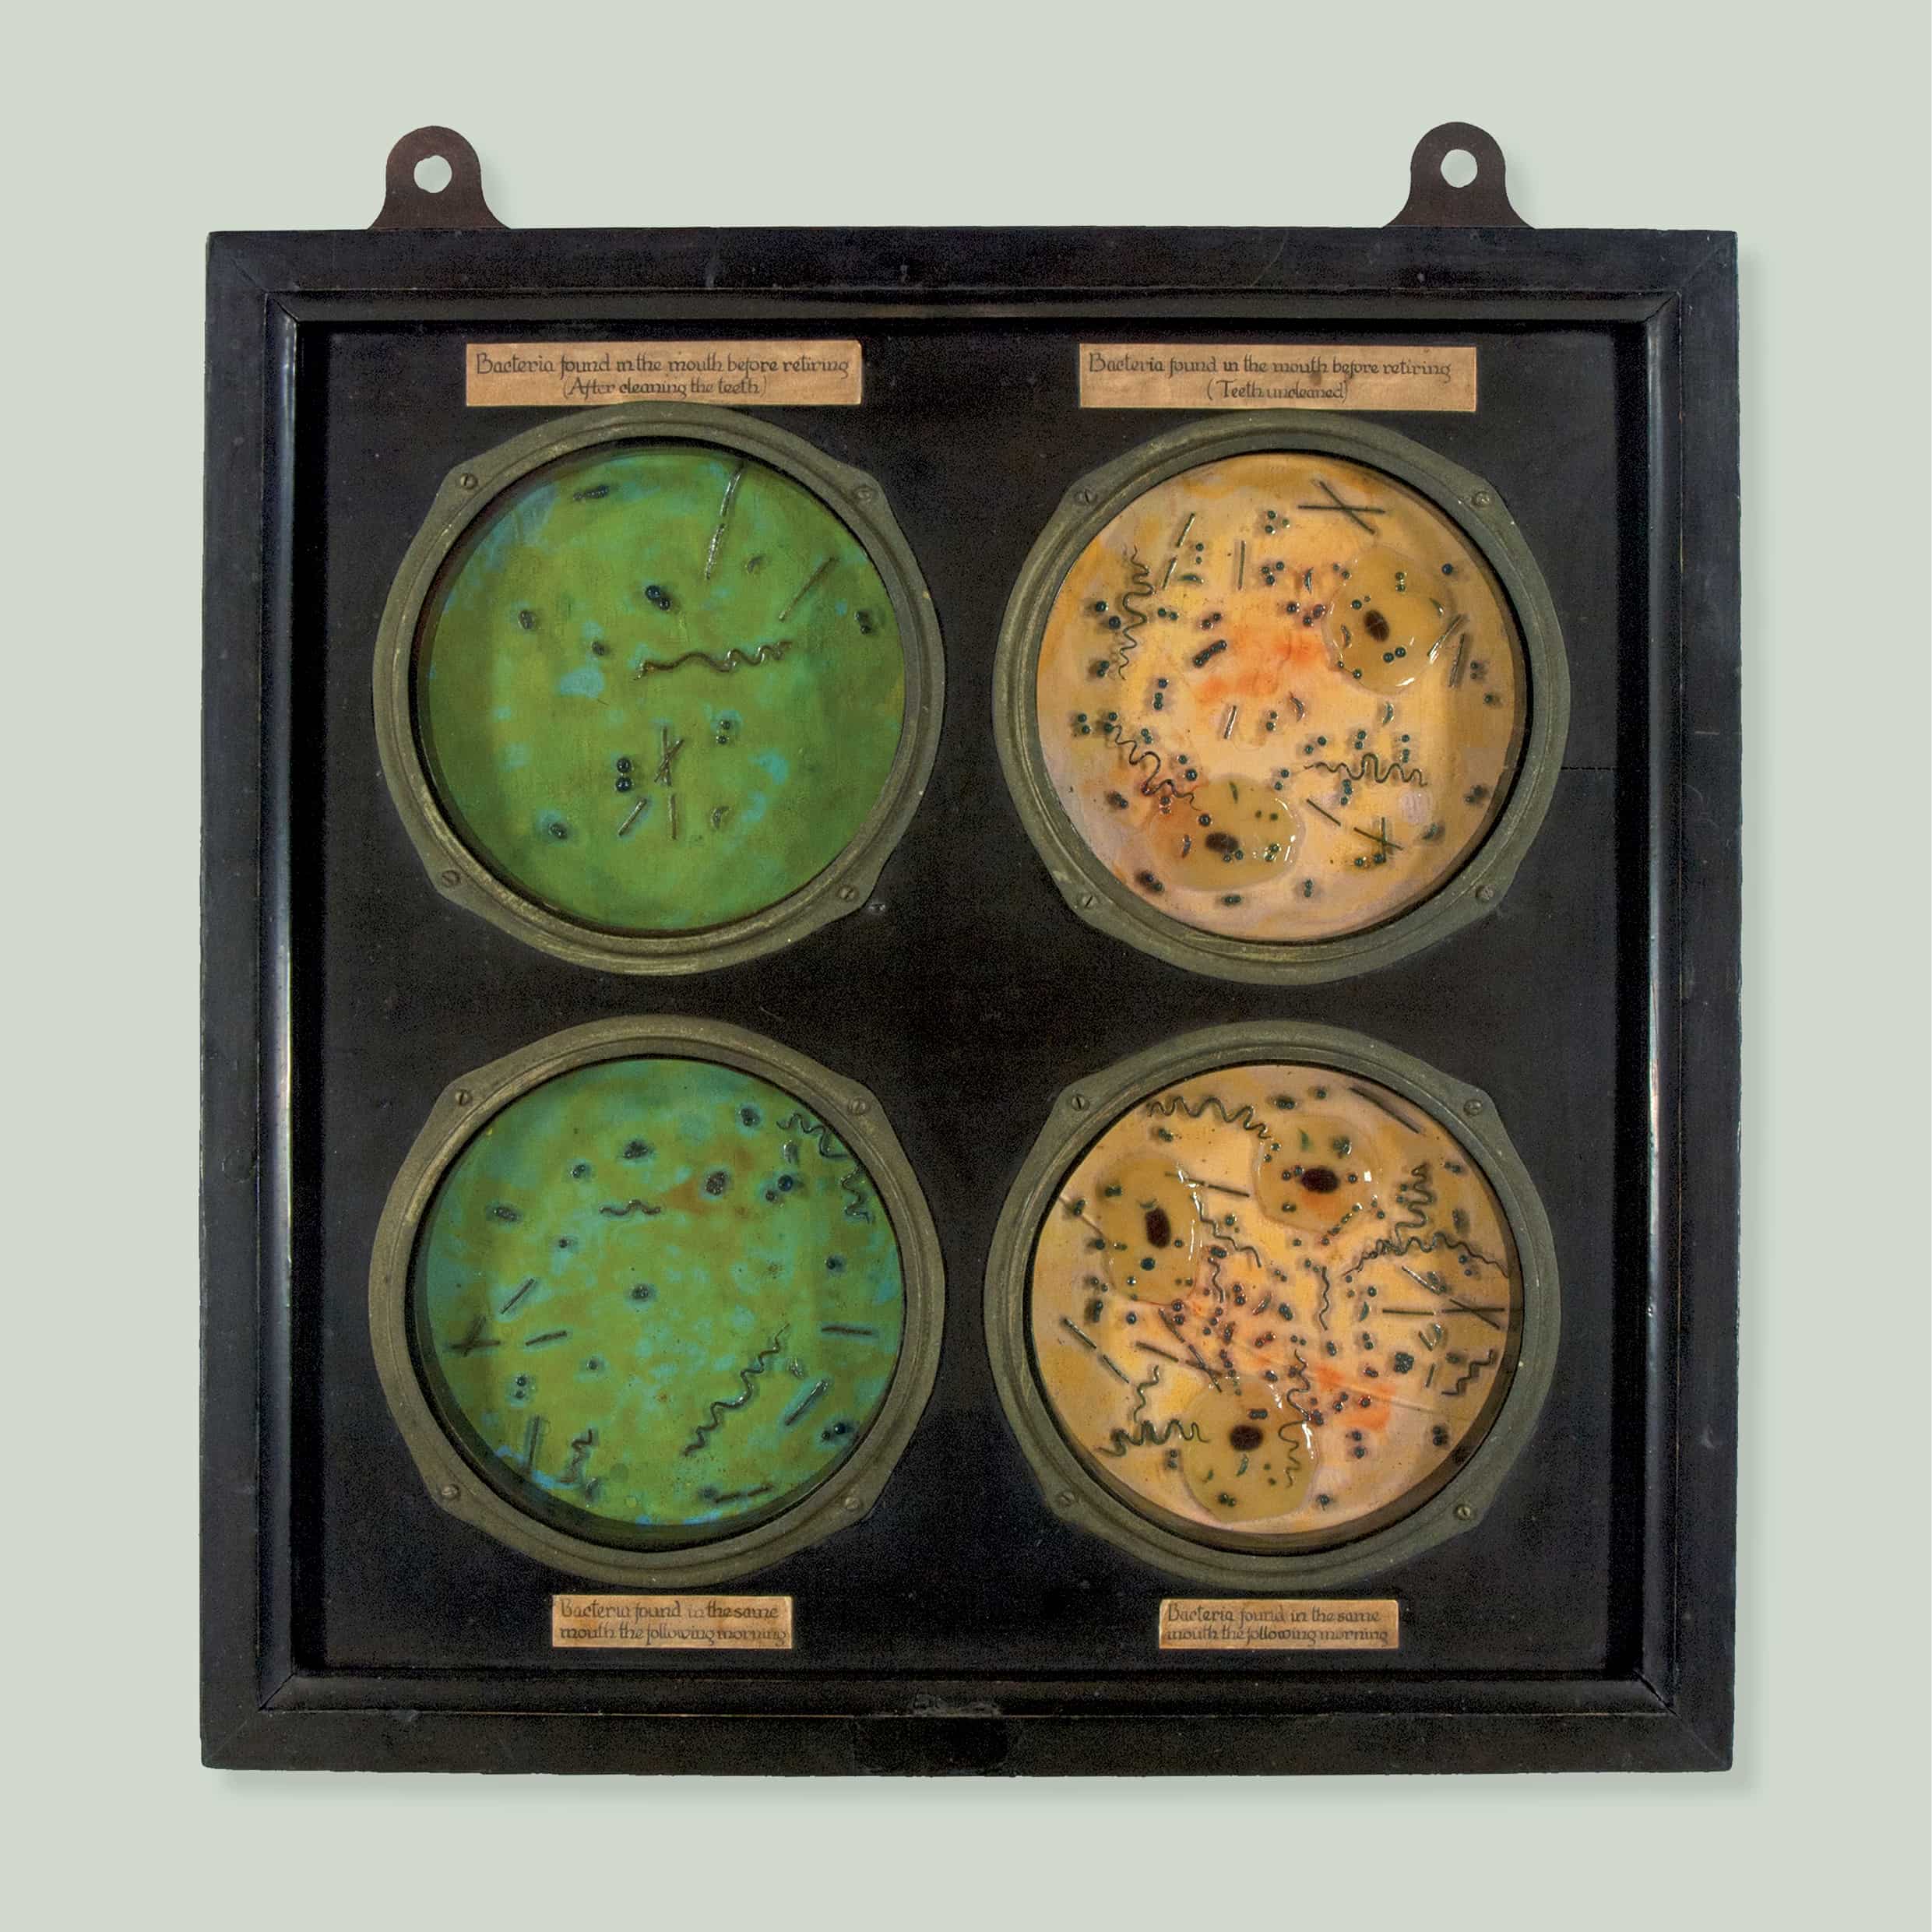 Model of oral bacteria in petri dishes, before and after cleaning teeth, c. 1905, wood, glass, metal, resin, paper; 37.5 × 37.5 × 3.5 cm. HFADM 1488, Henry Forman Atkinson Dental Museum, University of Melbourne.  